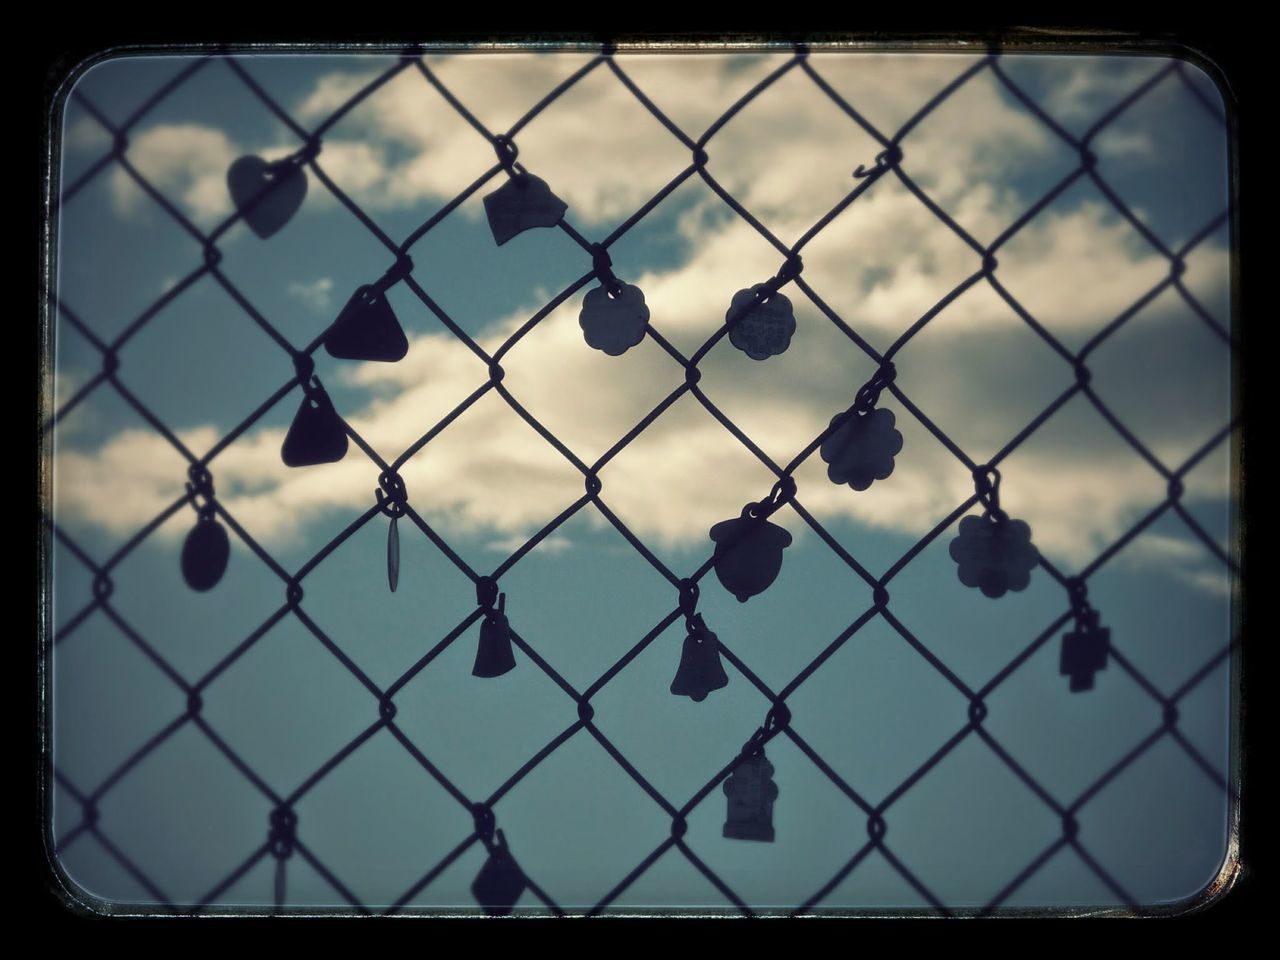 chainlink fence, security, protection, safety, metal, focus on foreground, no people, day, close-up, outdoors, sky, padlock, water, nature